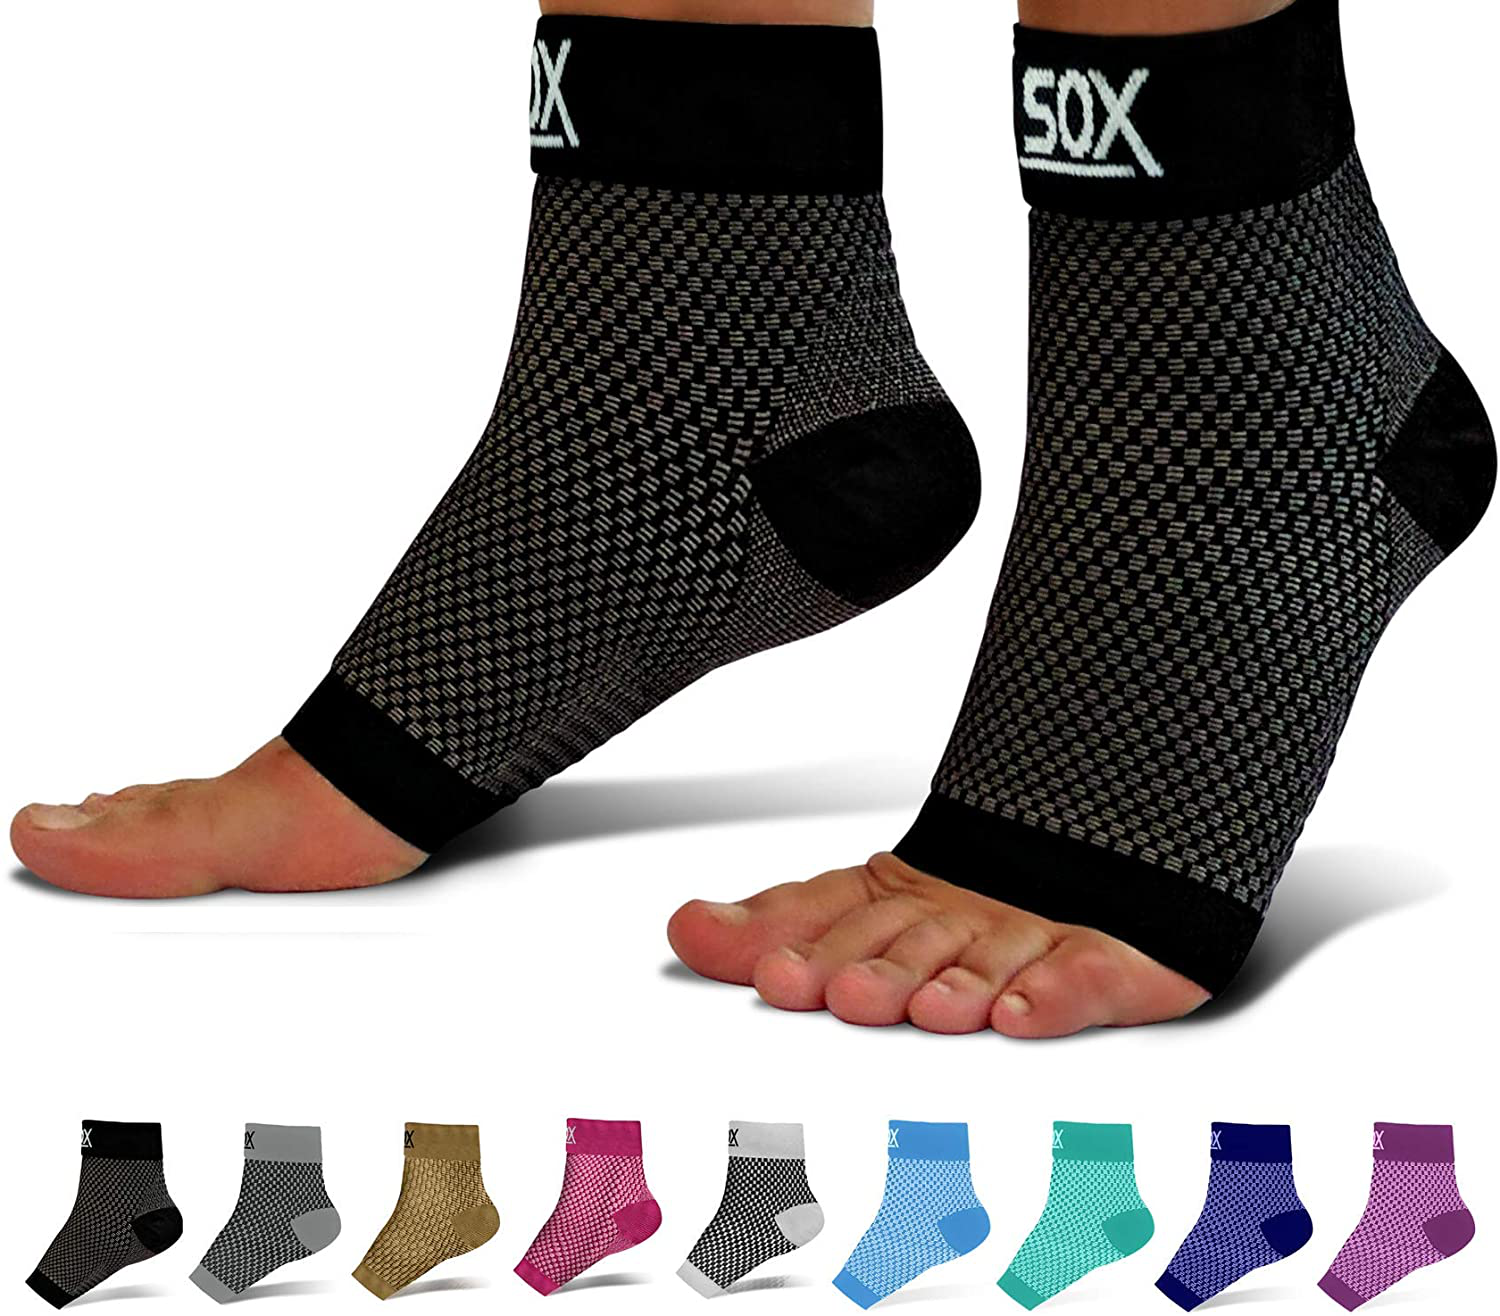 Plantar Fasciitis Compression Socks for Women & Men (1 Pair) - BEST Ankle Socks for Plantar Fasciitis Relief, Arch Support, and Foot/Heel Pain for Everyday Use